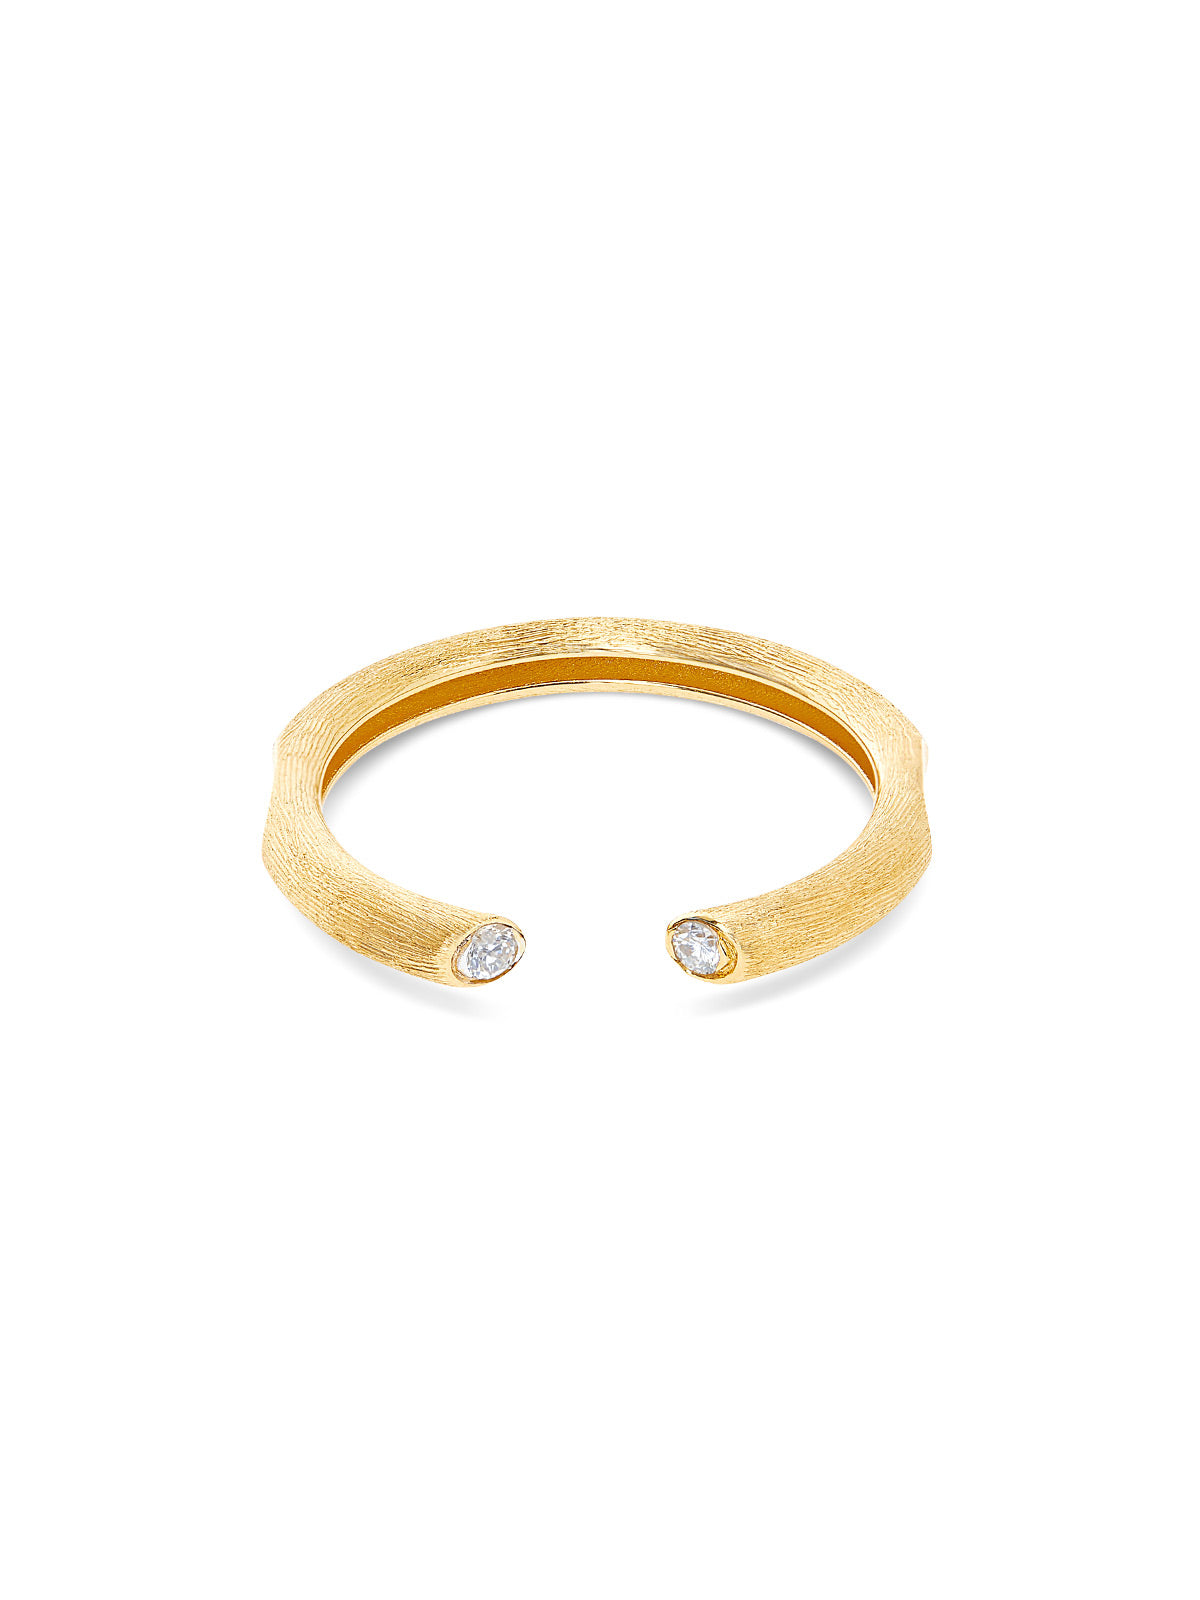 "Libera" Gold ring with diamond accents